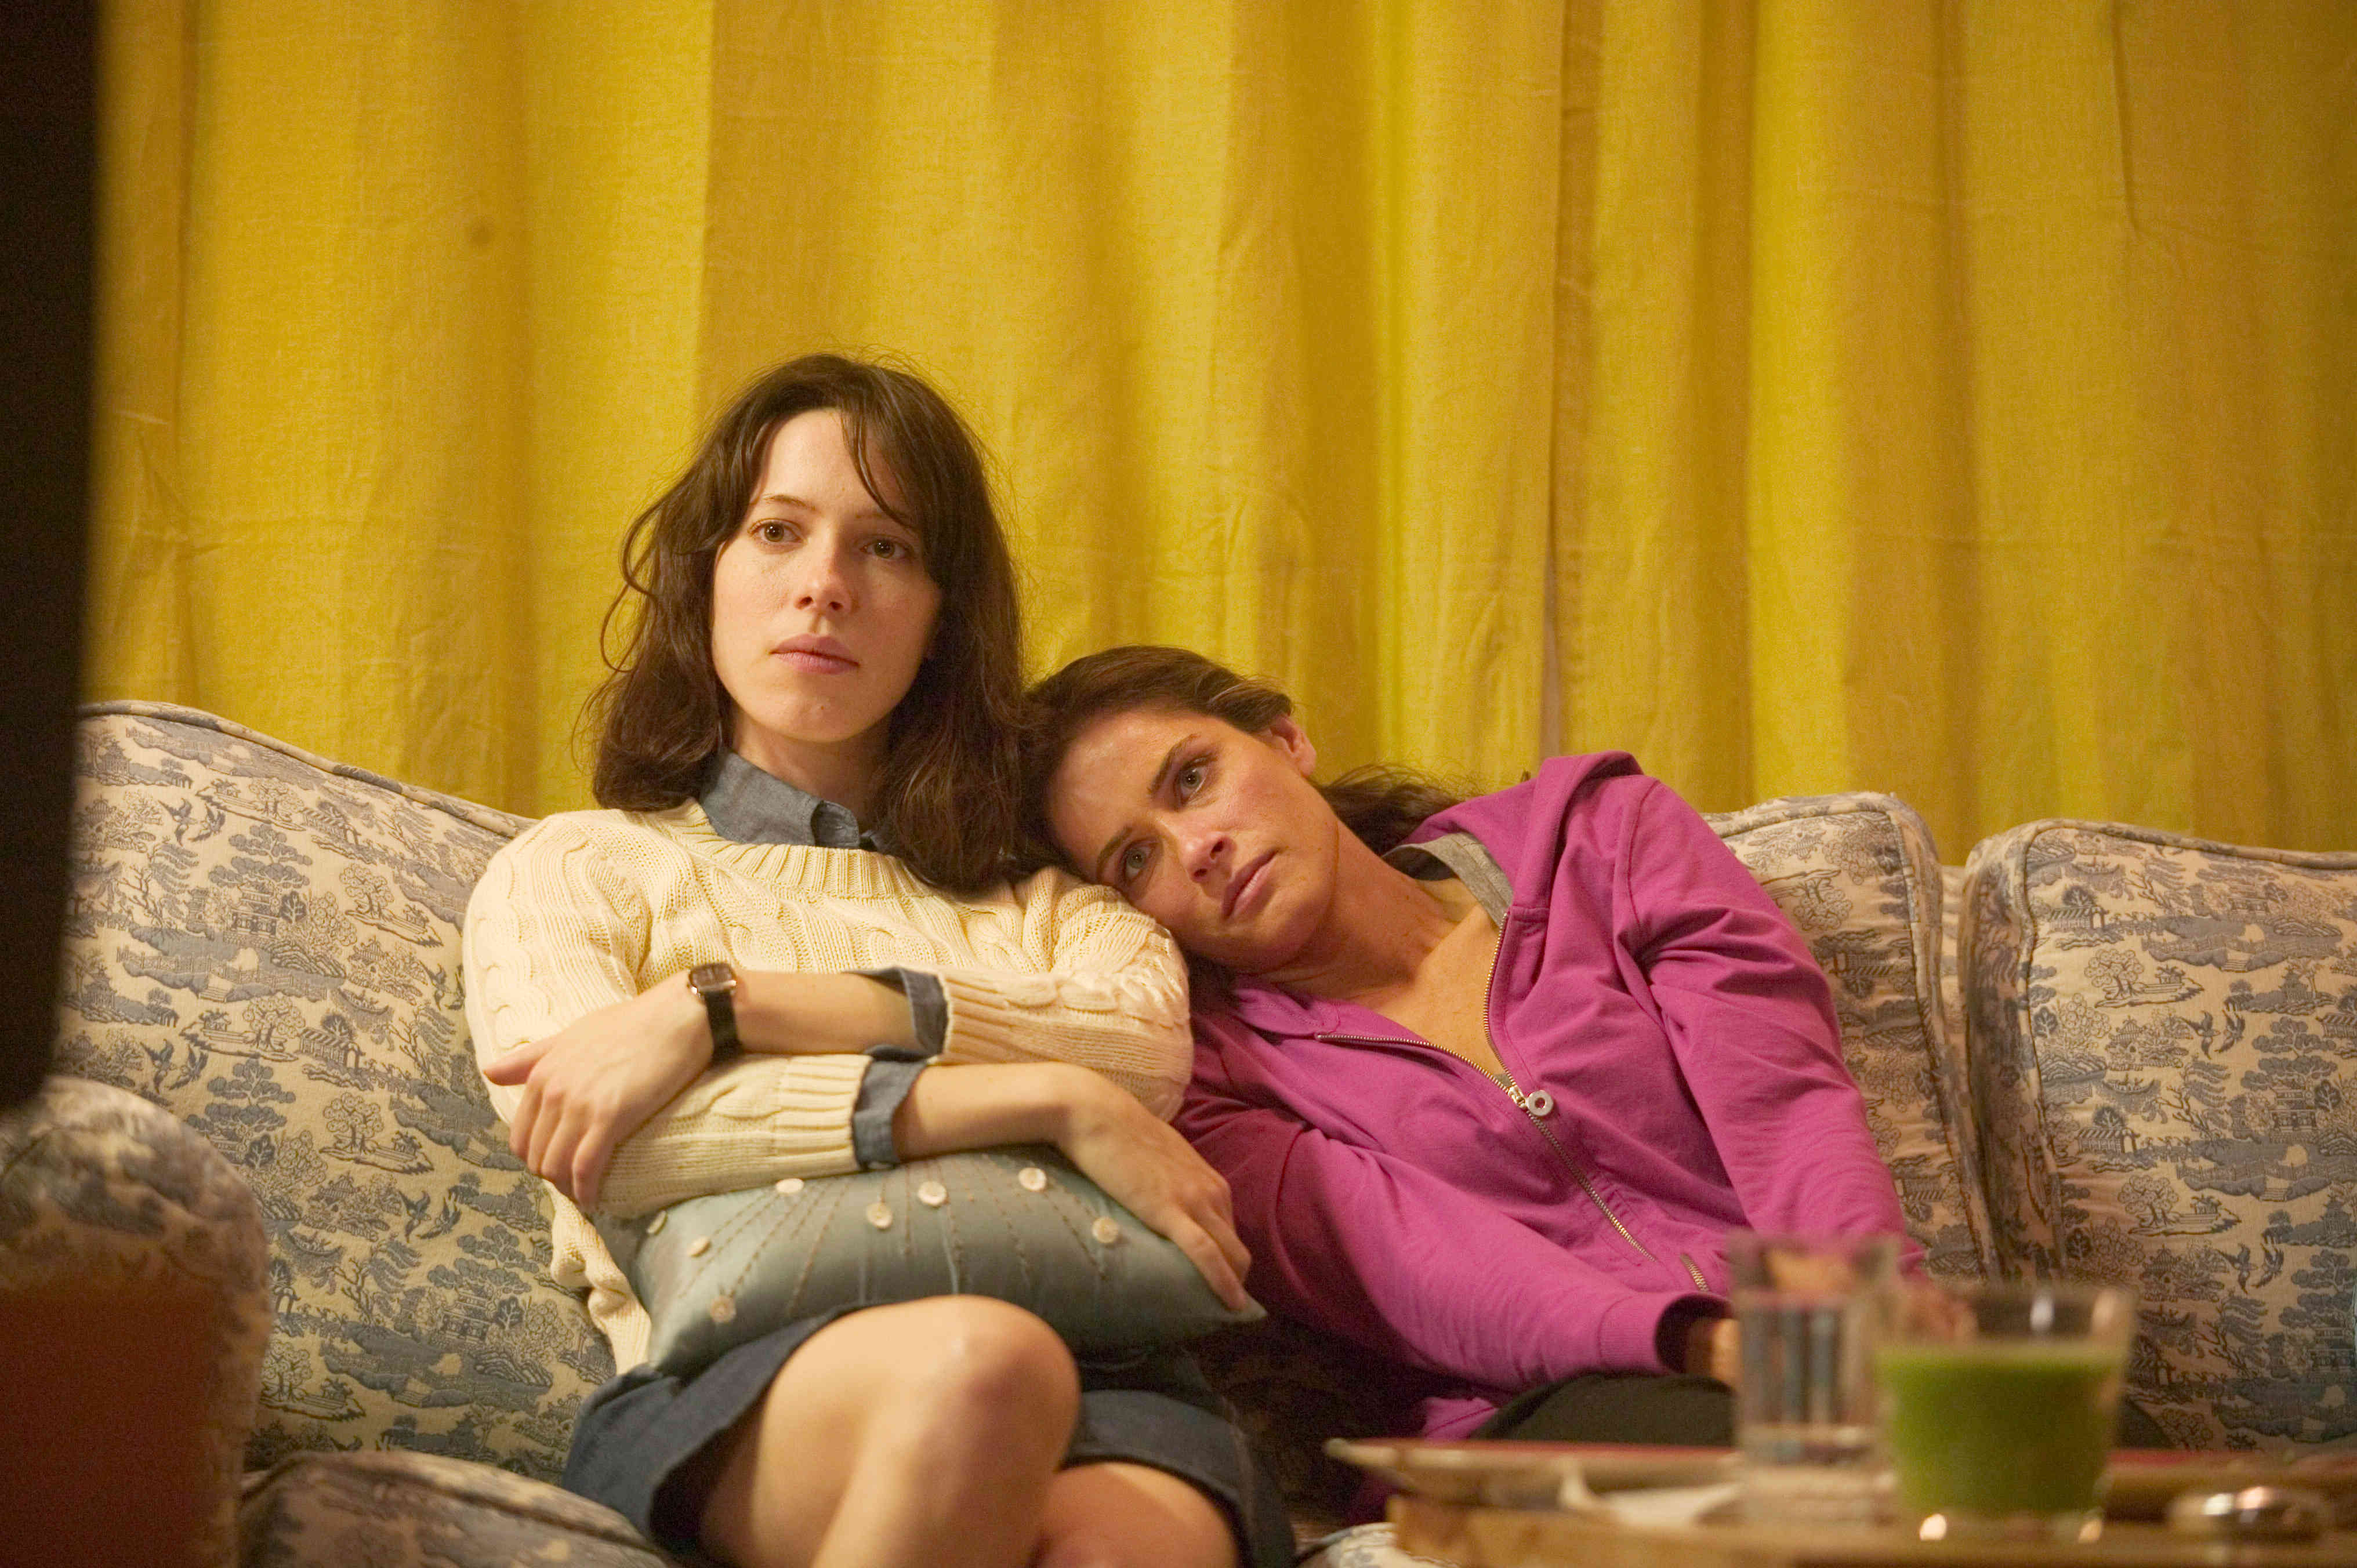 Rebecca Hall stars as Rebecca and Amanda Peet stars as Mary in Sony Pictures Classics' Please Give (2010). Photo credit by Piotr Redlinksi.